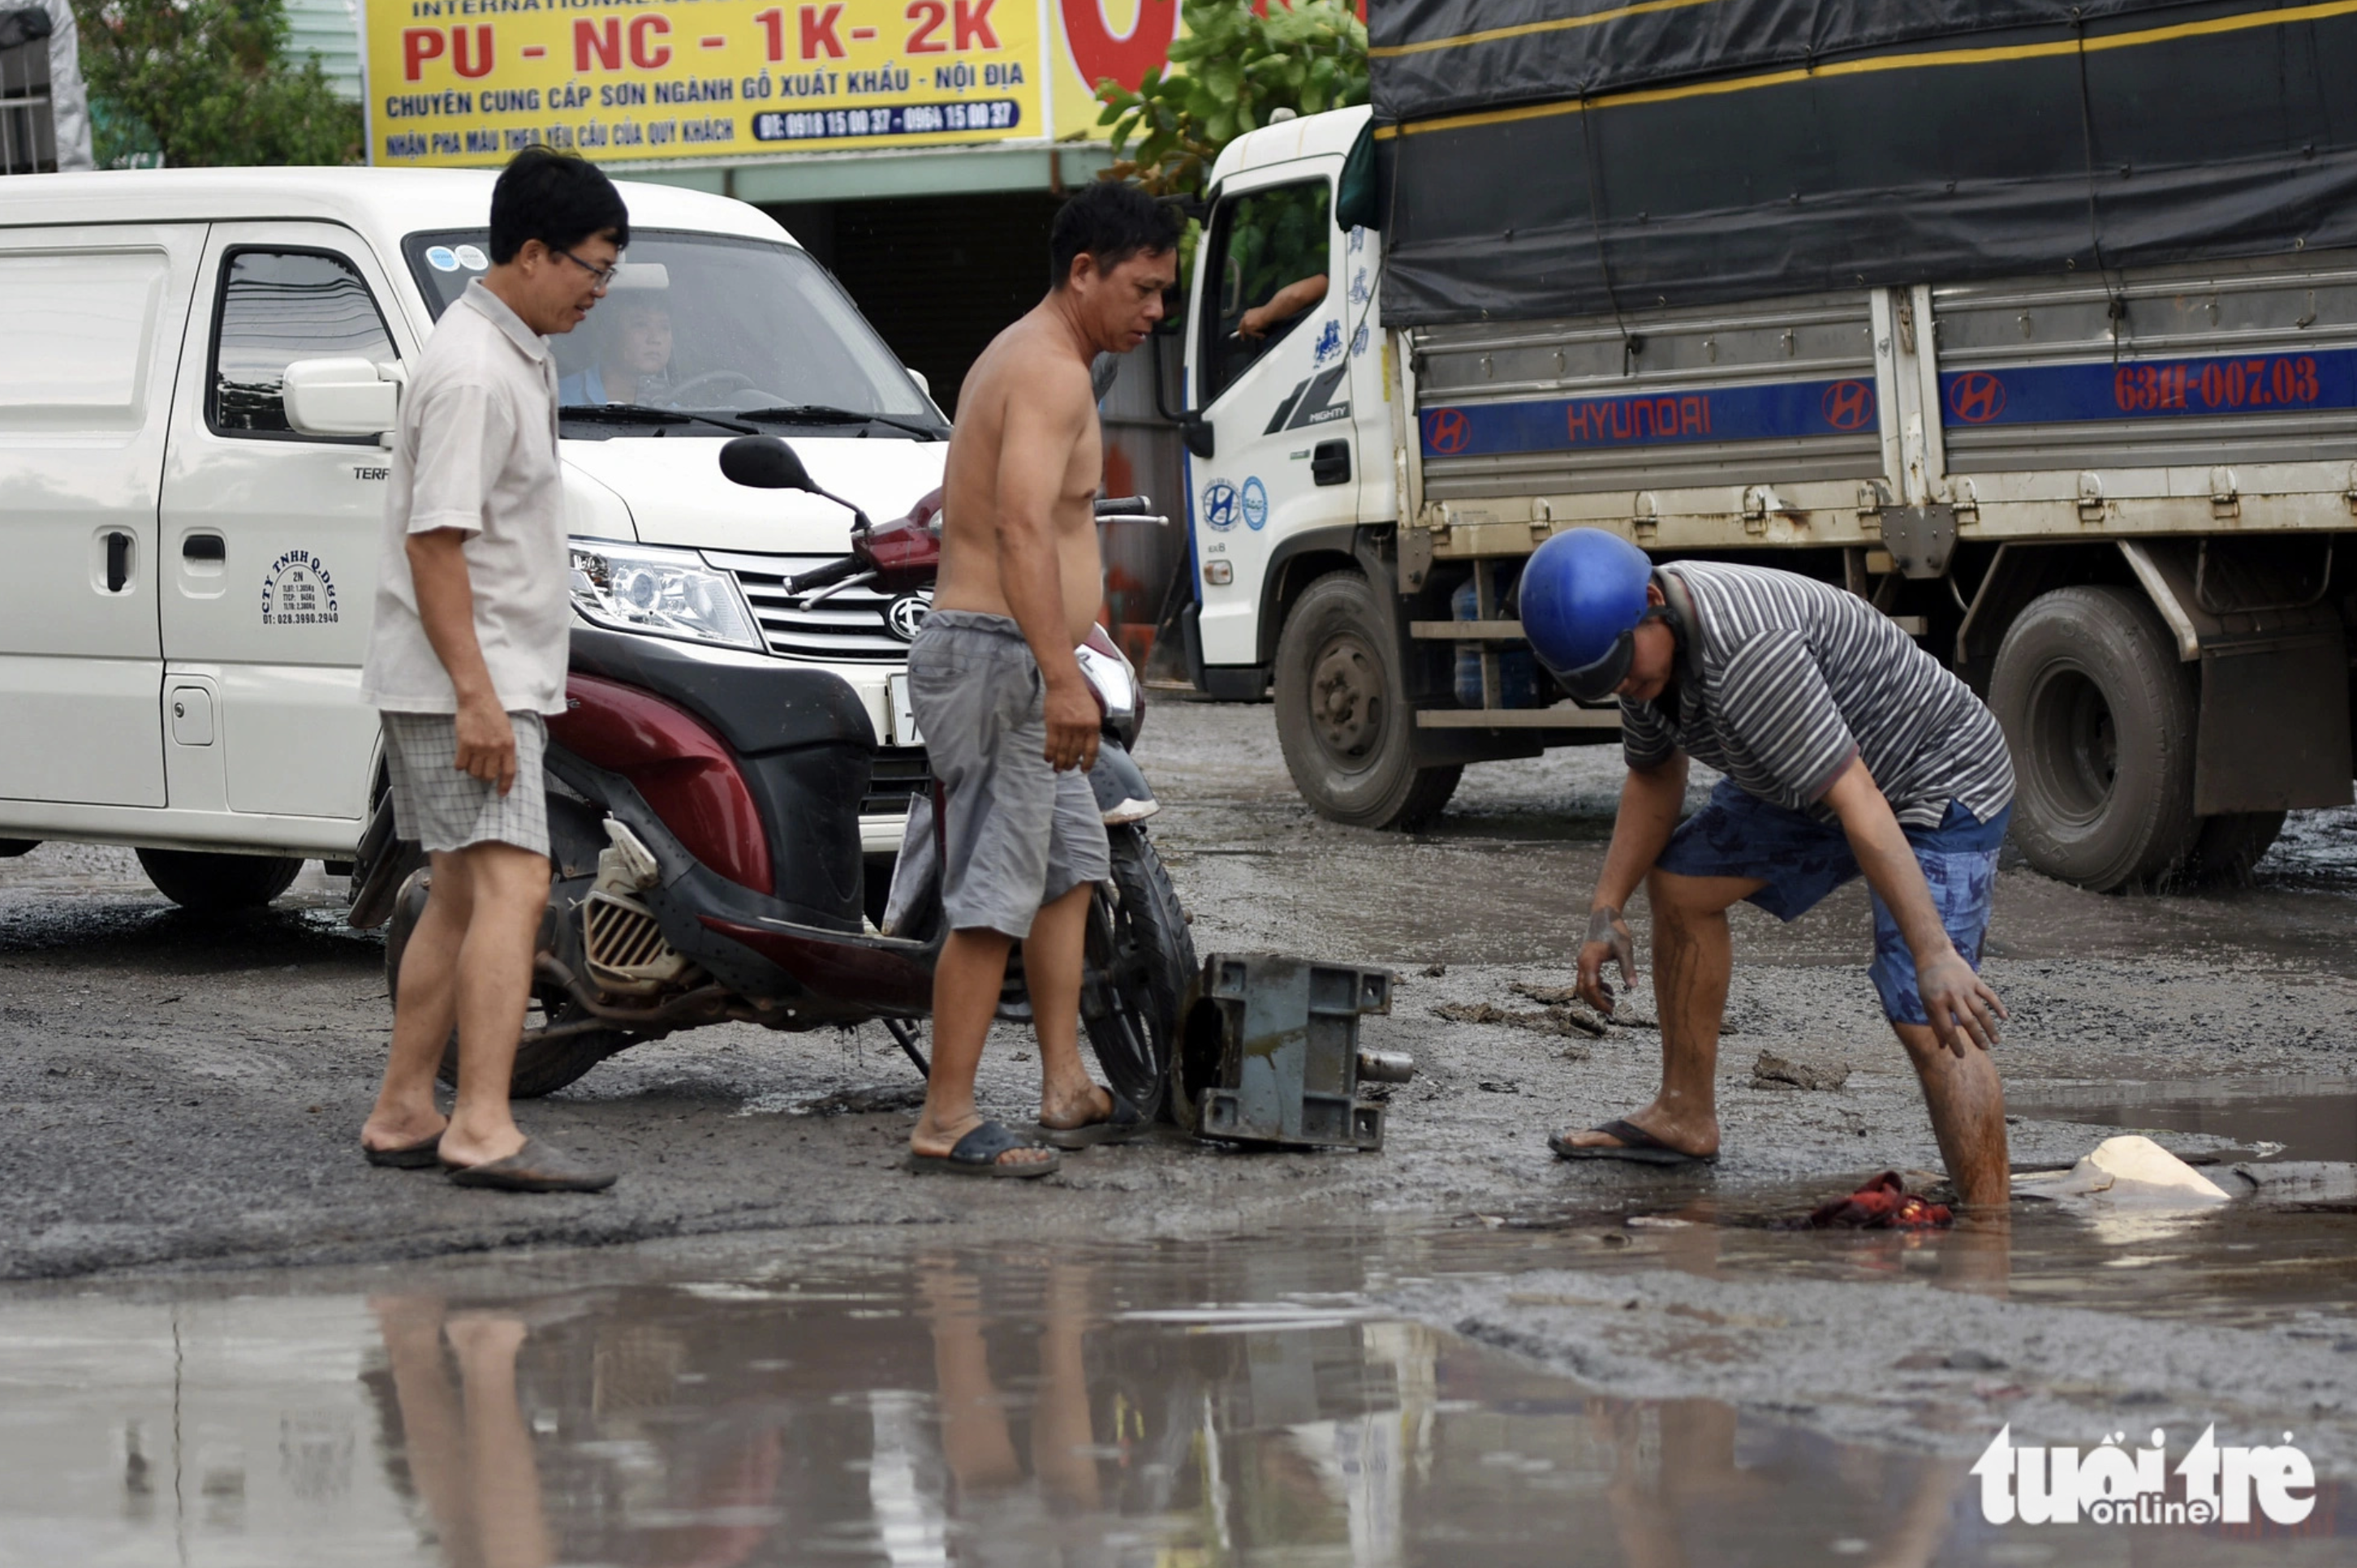 A rider hits a pothole and falls off his motorcycle. Photo: A Loc / Tuoi Tre